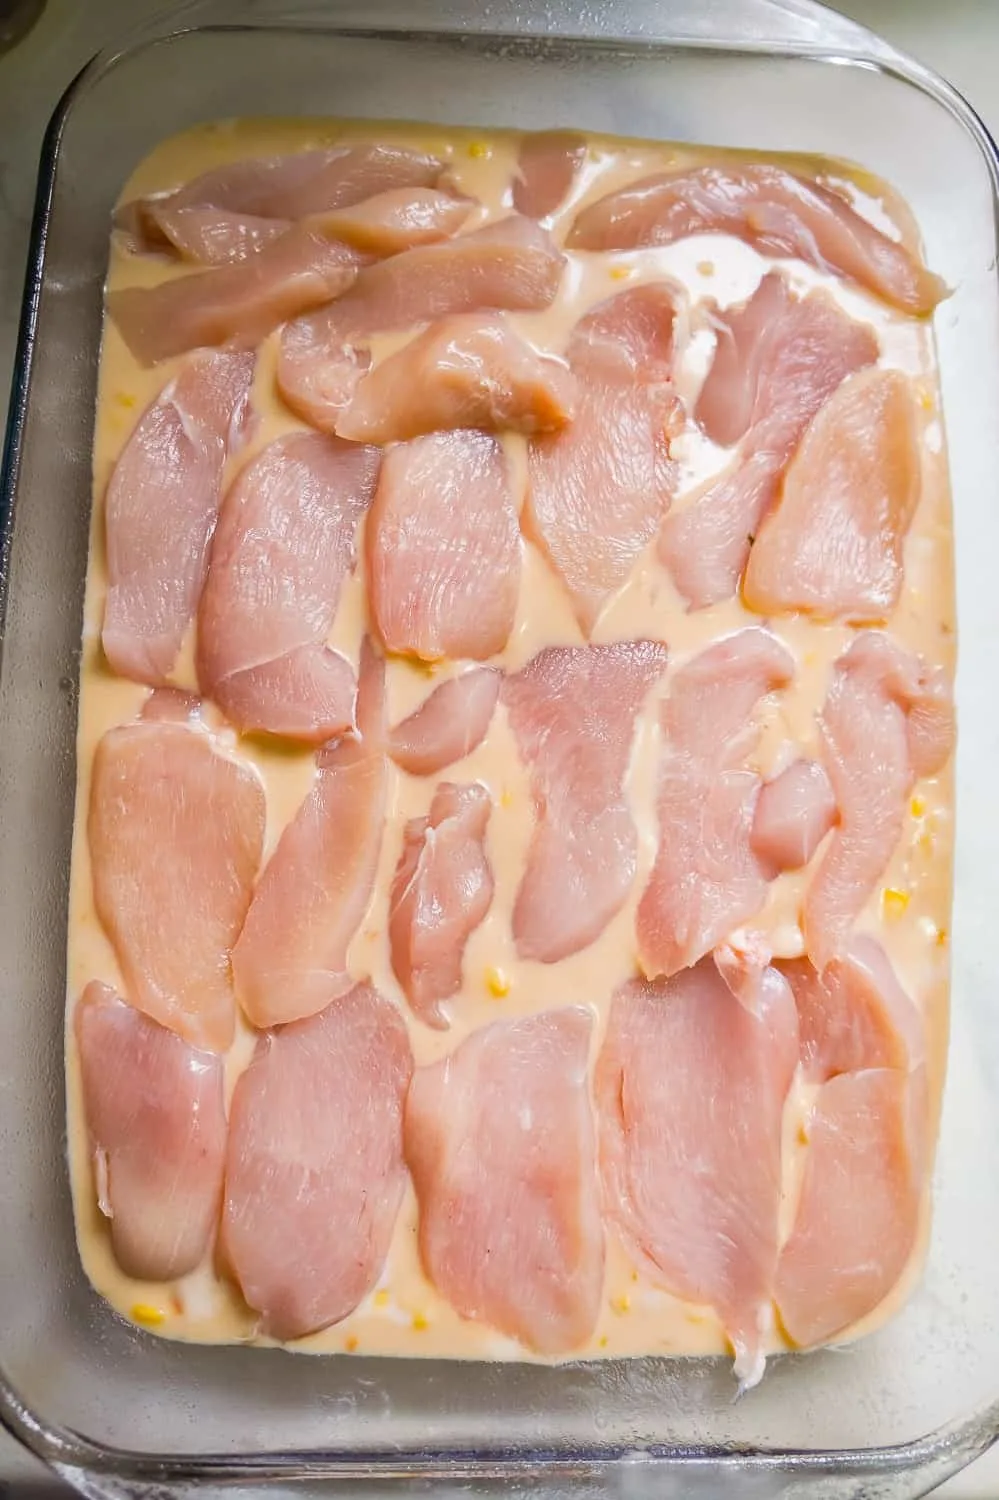 raw chicken breast slices on top of creamy rice mixture in a baking dish